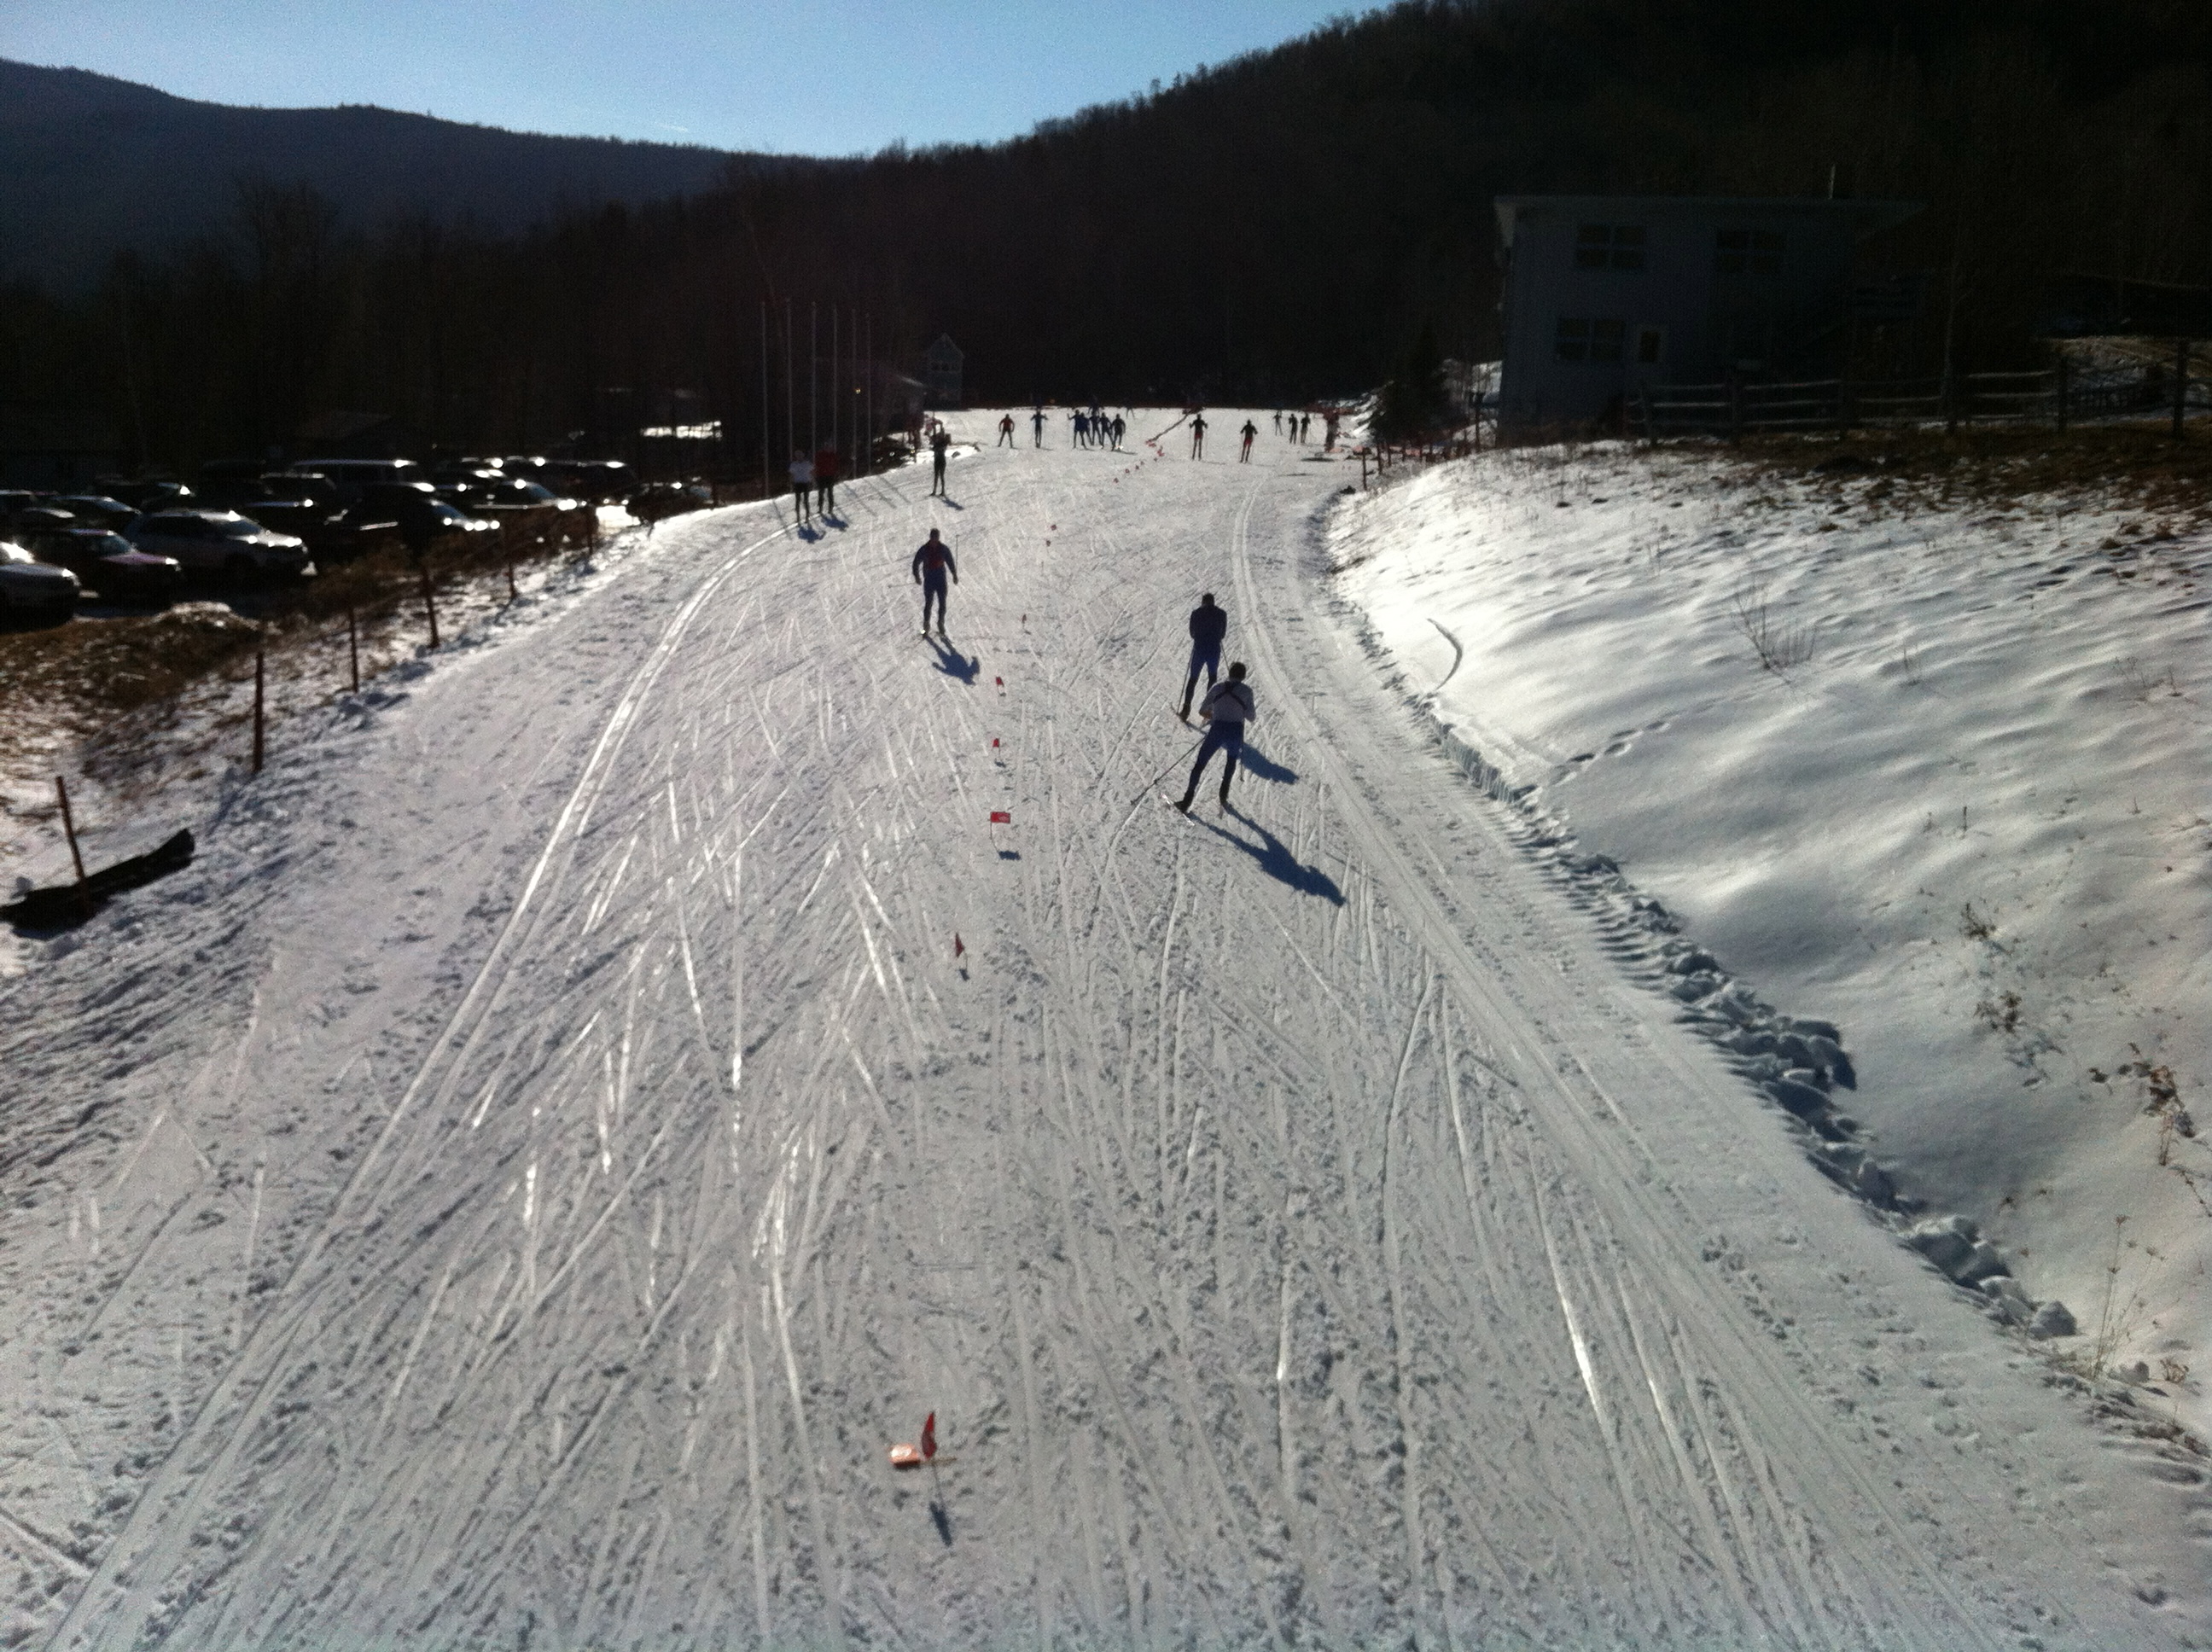 One Day ‘Til Nationals: A Look at Rumford (Video)